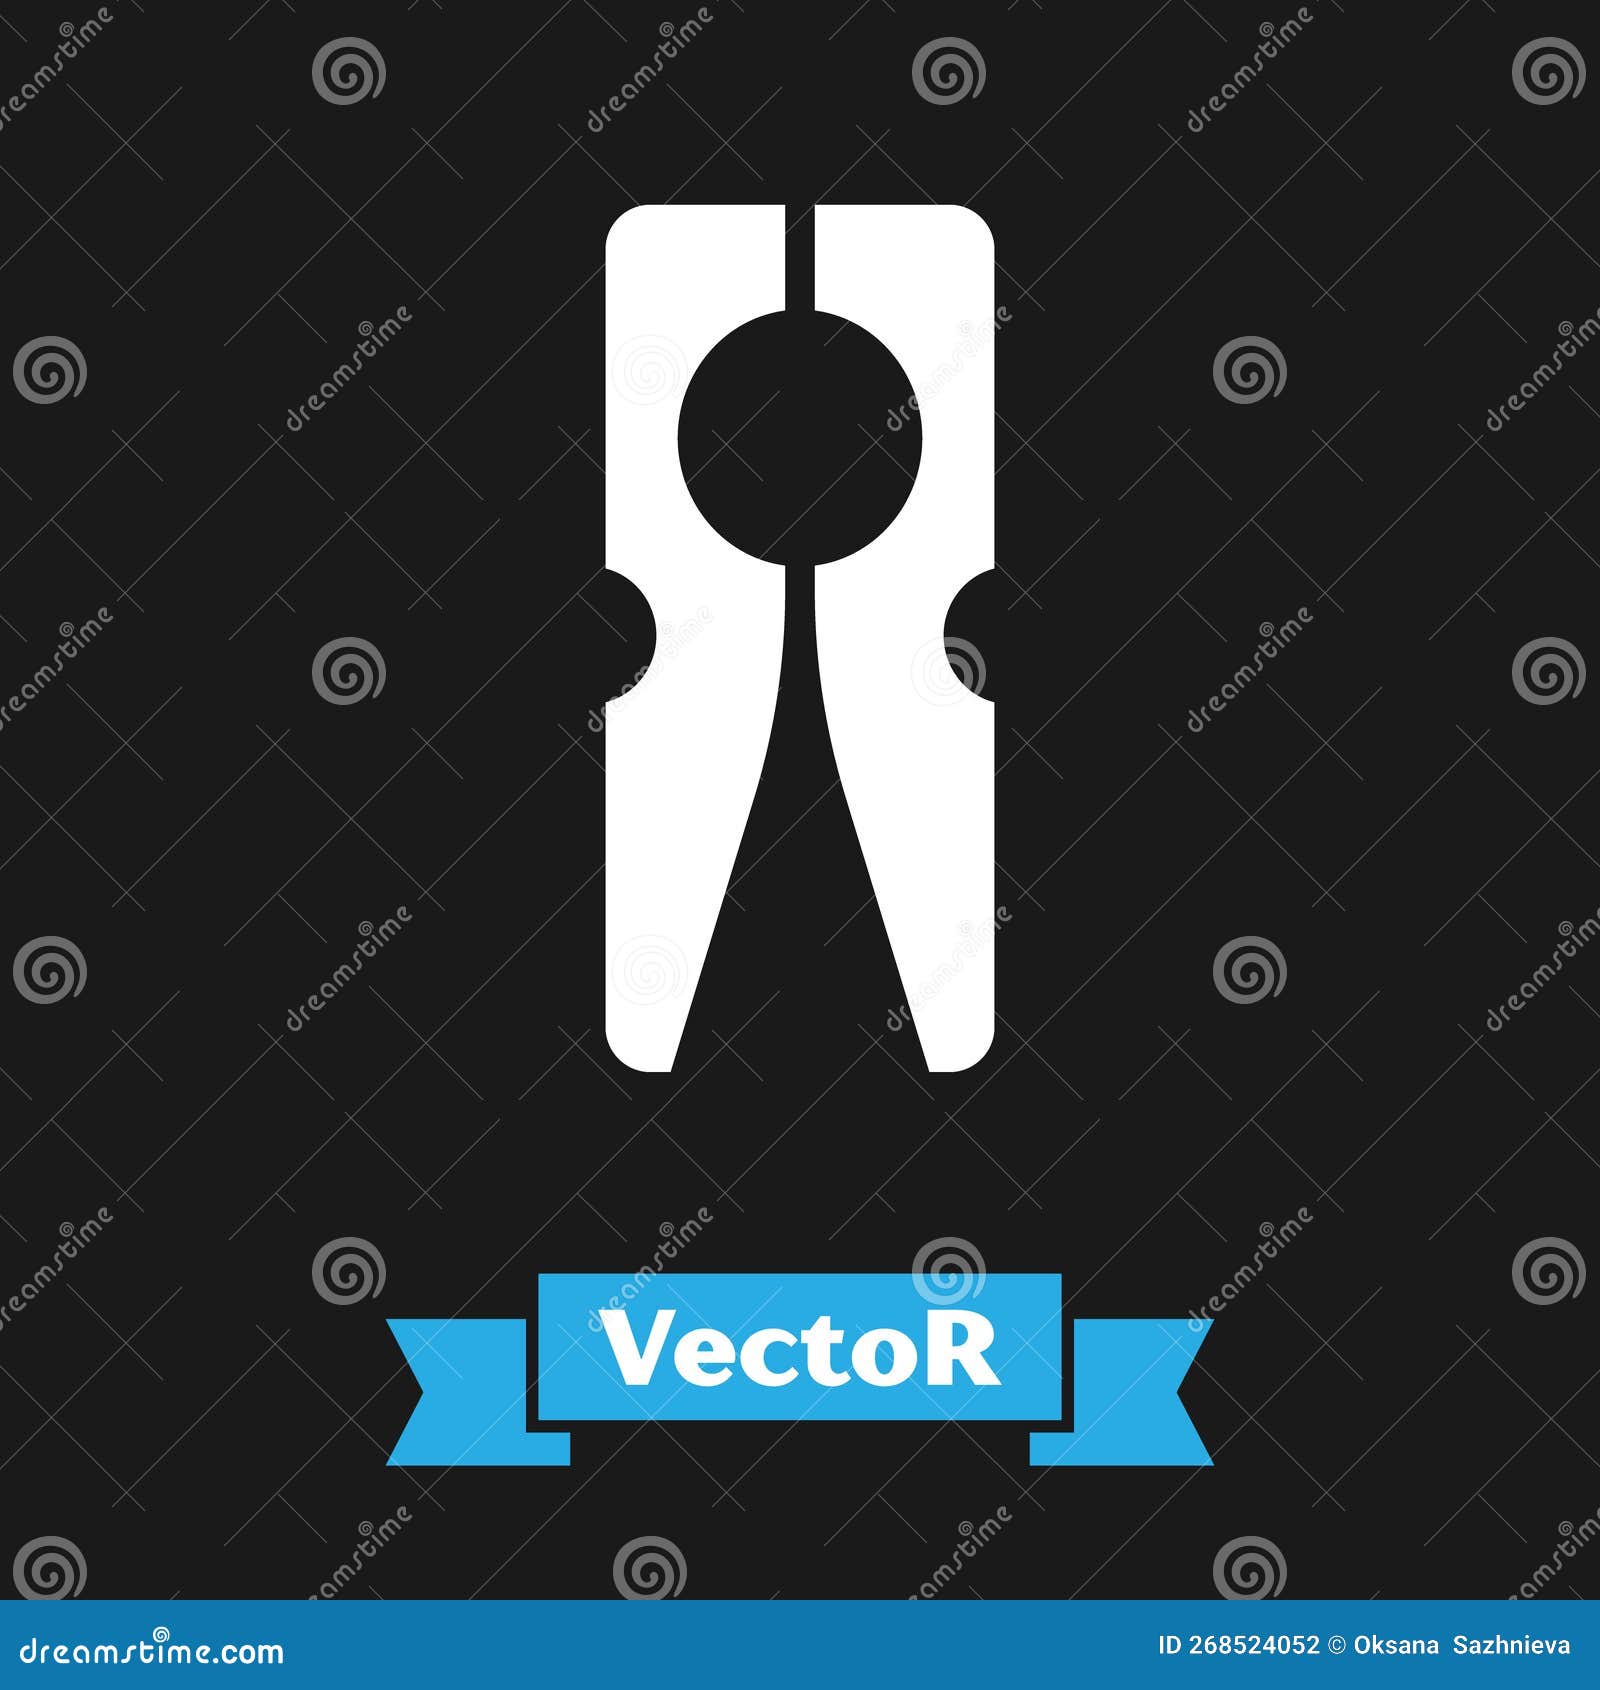 White Old Wood Clothes Pin Icon Isolated on Black Background. Clothes Peg  Stock Vector - Illustration of hang, hold: 268524052